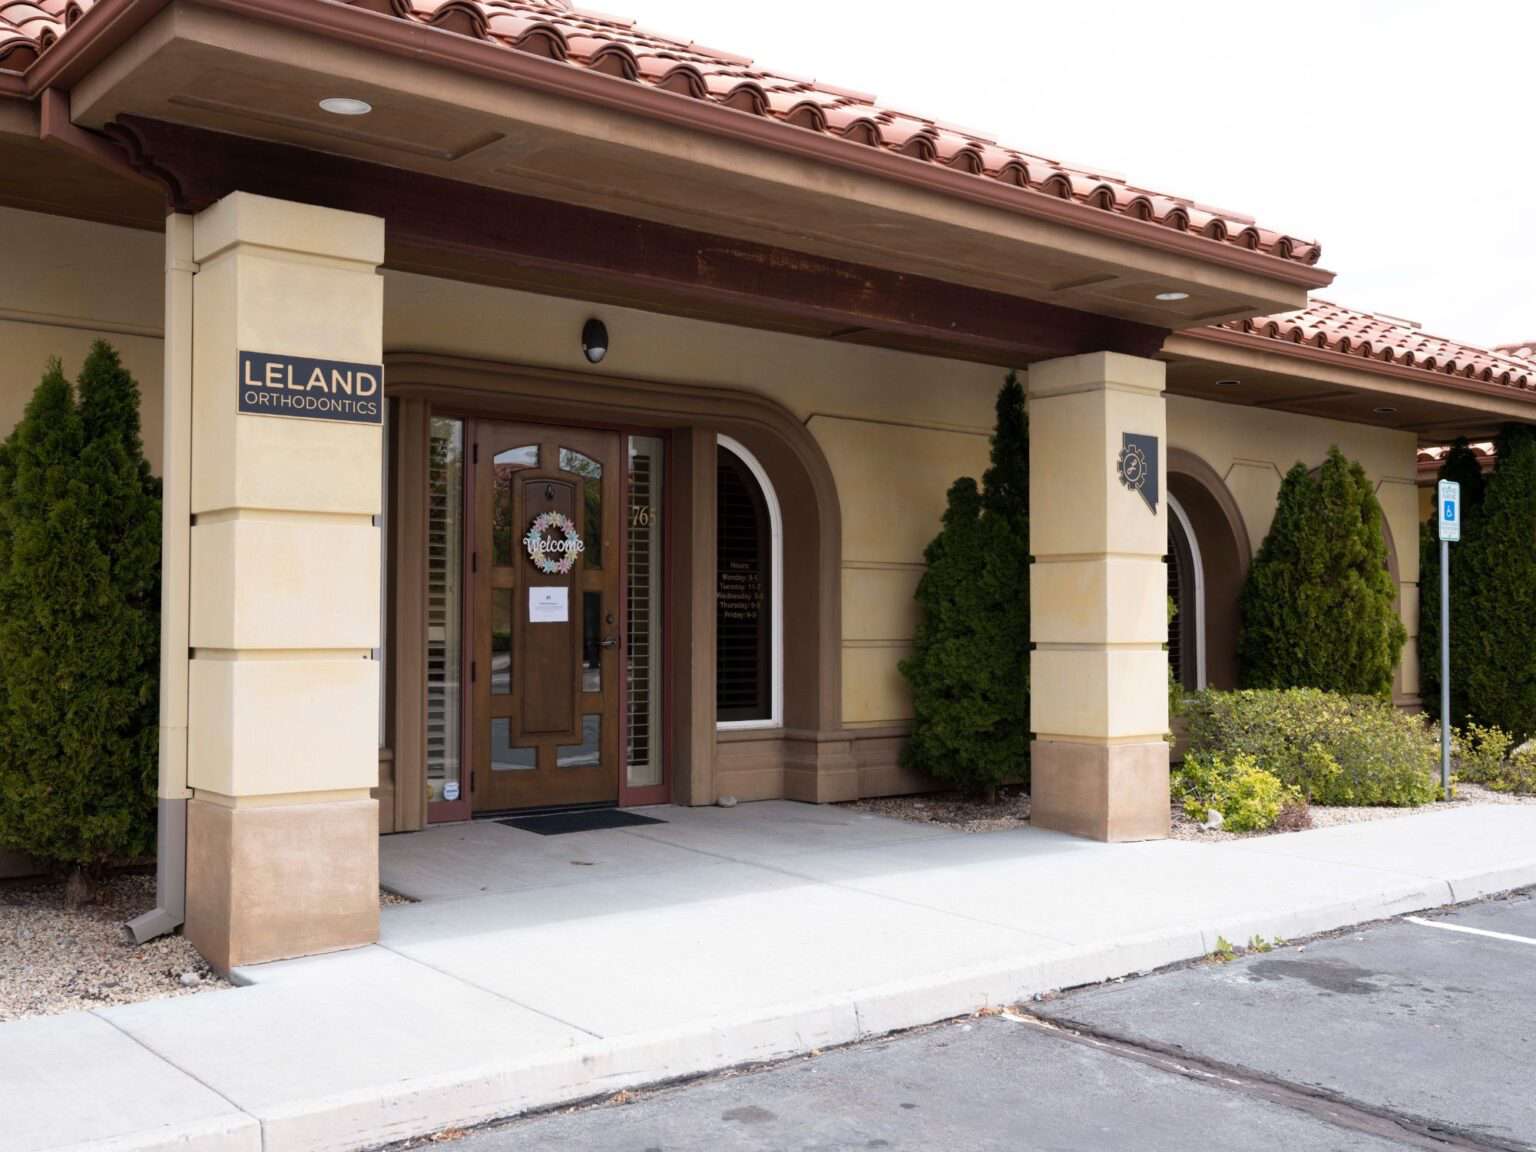 Leland Orthodontics office front view